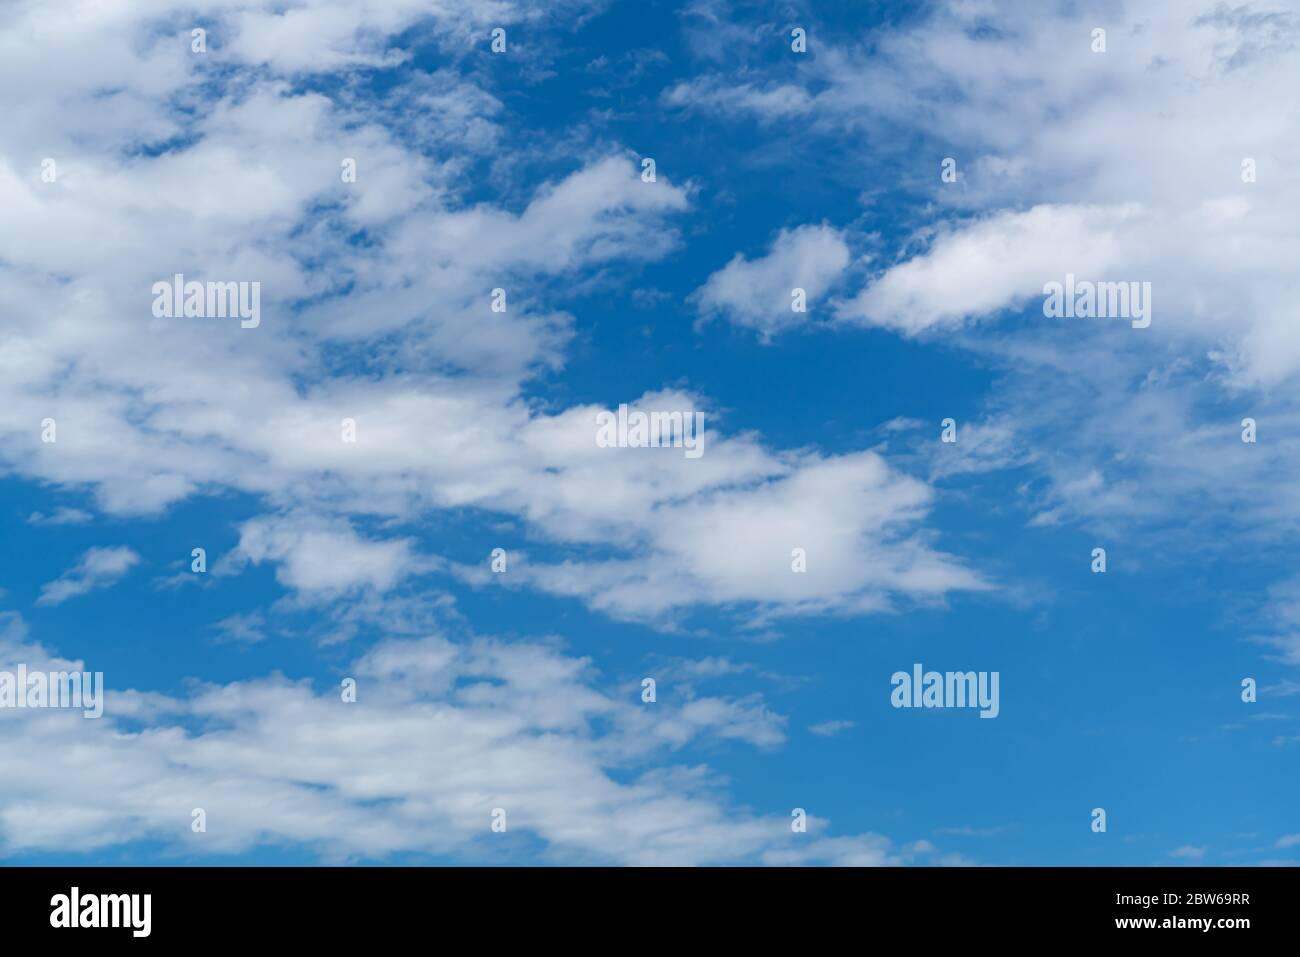 Beautiful blue sky with white cloud. Fluffy clouds moving in the wind on the blue sky. Stock Photo